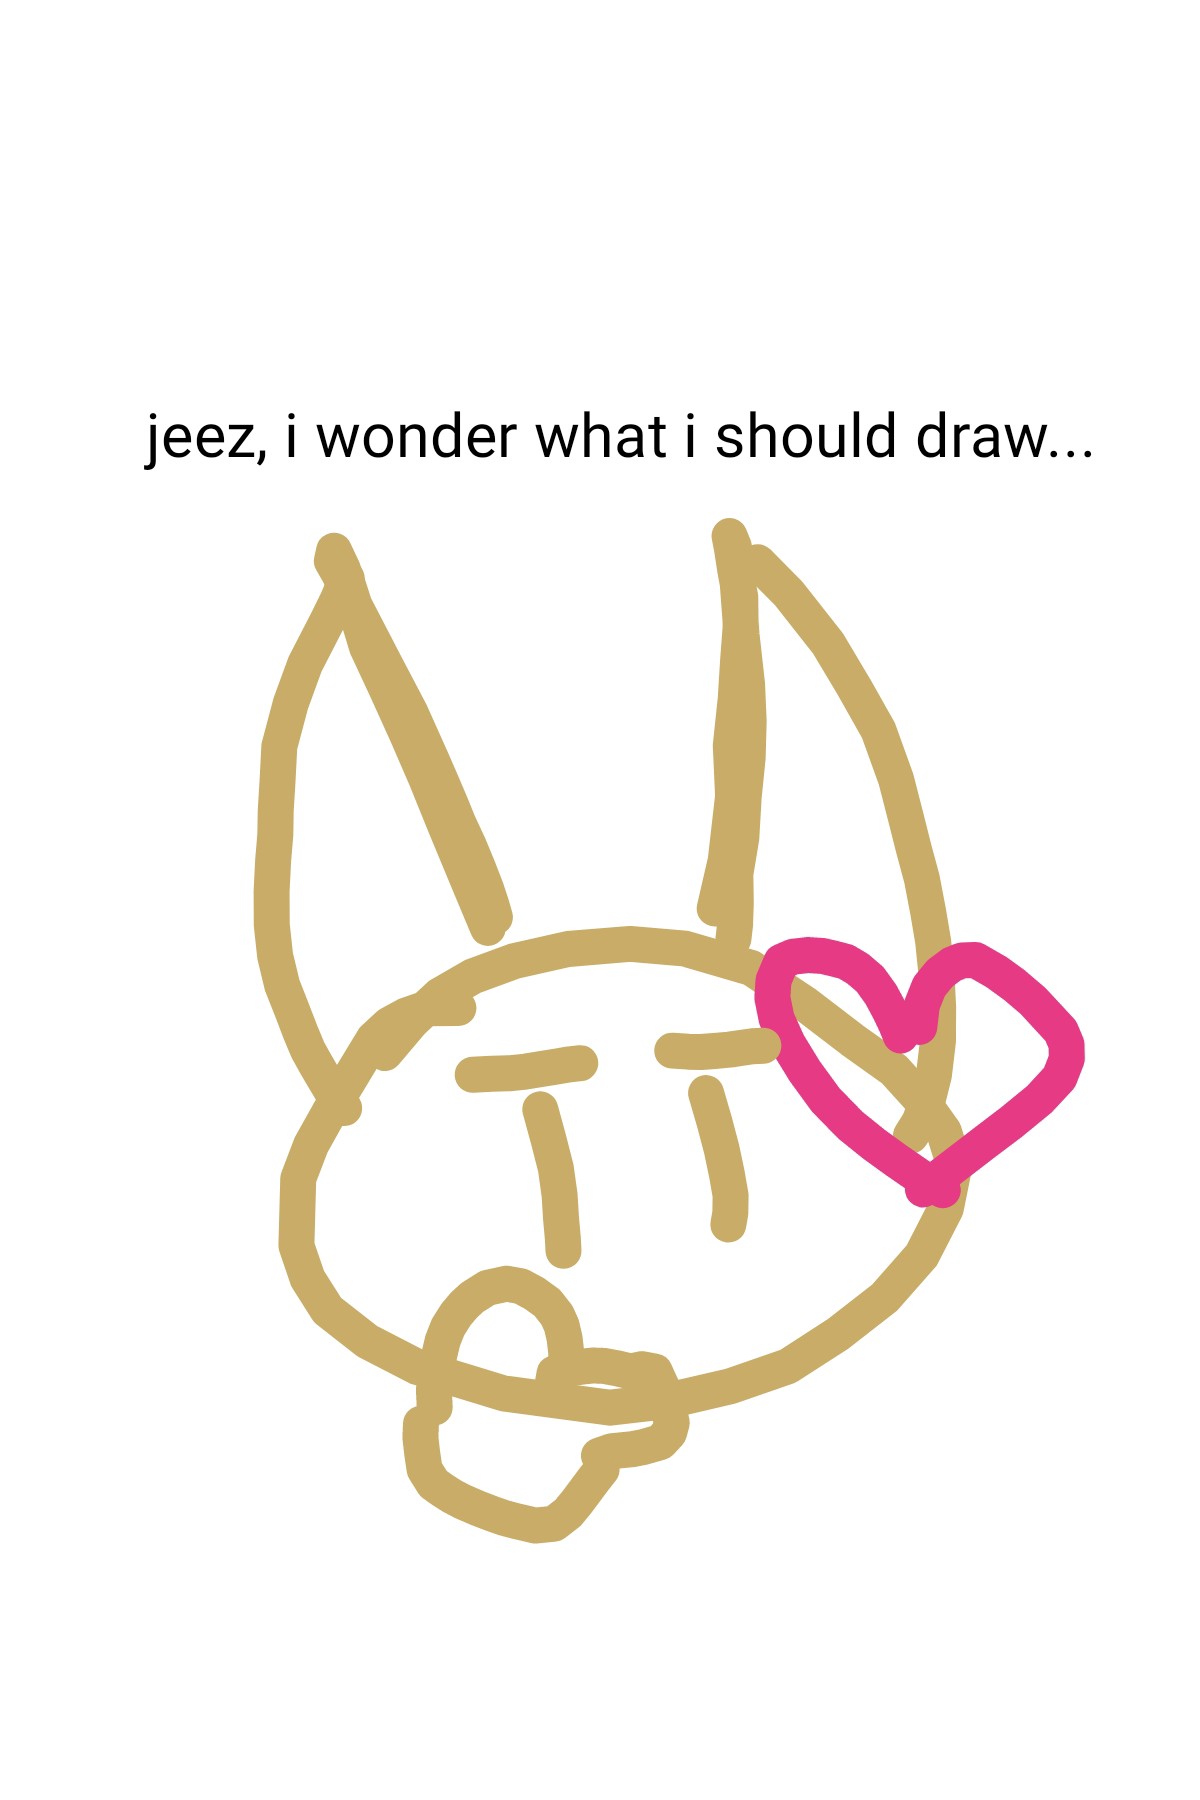 What to draw...